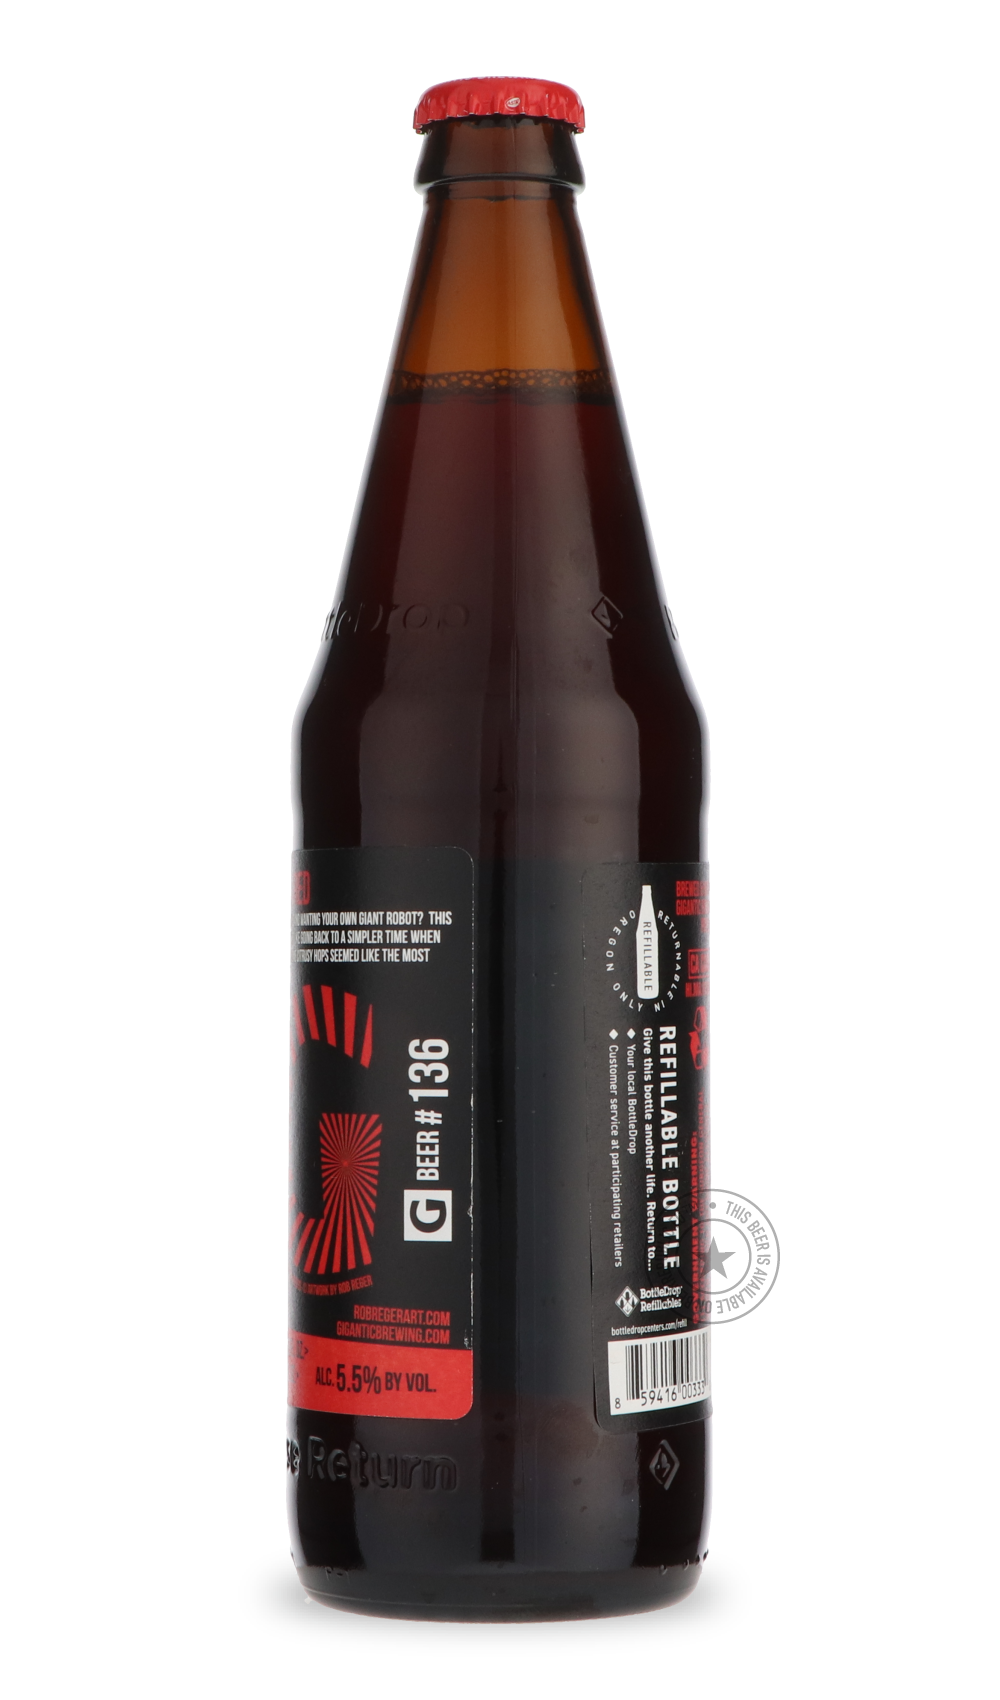 -Gigantic- Mecha Red-Brown & Dark- Only @ Beer Republic - The best online beer store for American & Canadian craft beer - Buy beer online from the USA and Canada - Bier online kopen - Amerikaans bier kopen - Craft beer store - Craft beer kopen - Amerikanisch bier kaufen - Bier online kaufen - Acheter biere online - IPA - Stout - Porter - New England IPA - Hazy IPA - Imperial Stout - Barrel Aged - Barrel Aged Imperial Stout - Brown - Dark beer - Blond - Blonde - Pilsner - Lager - Wheat - Weizen - Amber - Bar